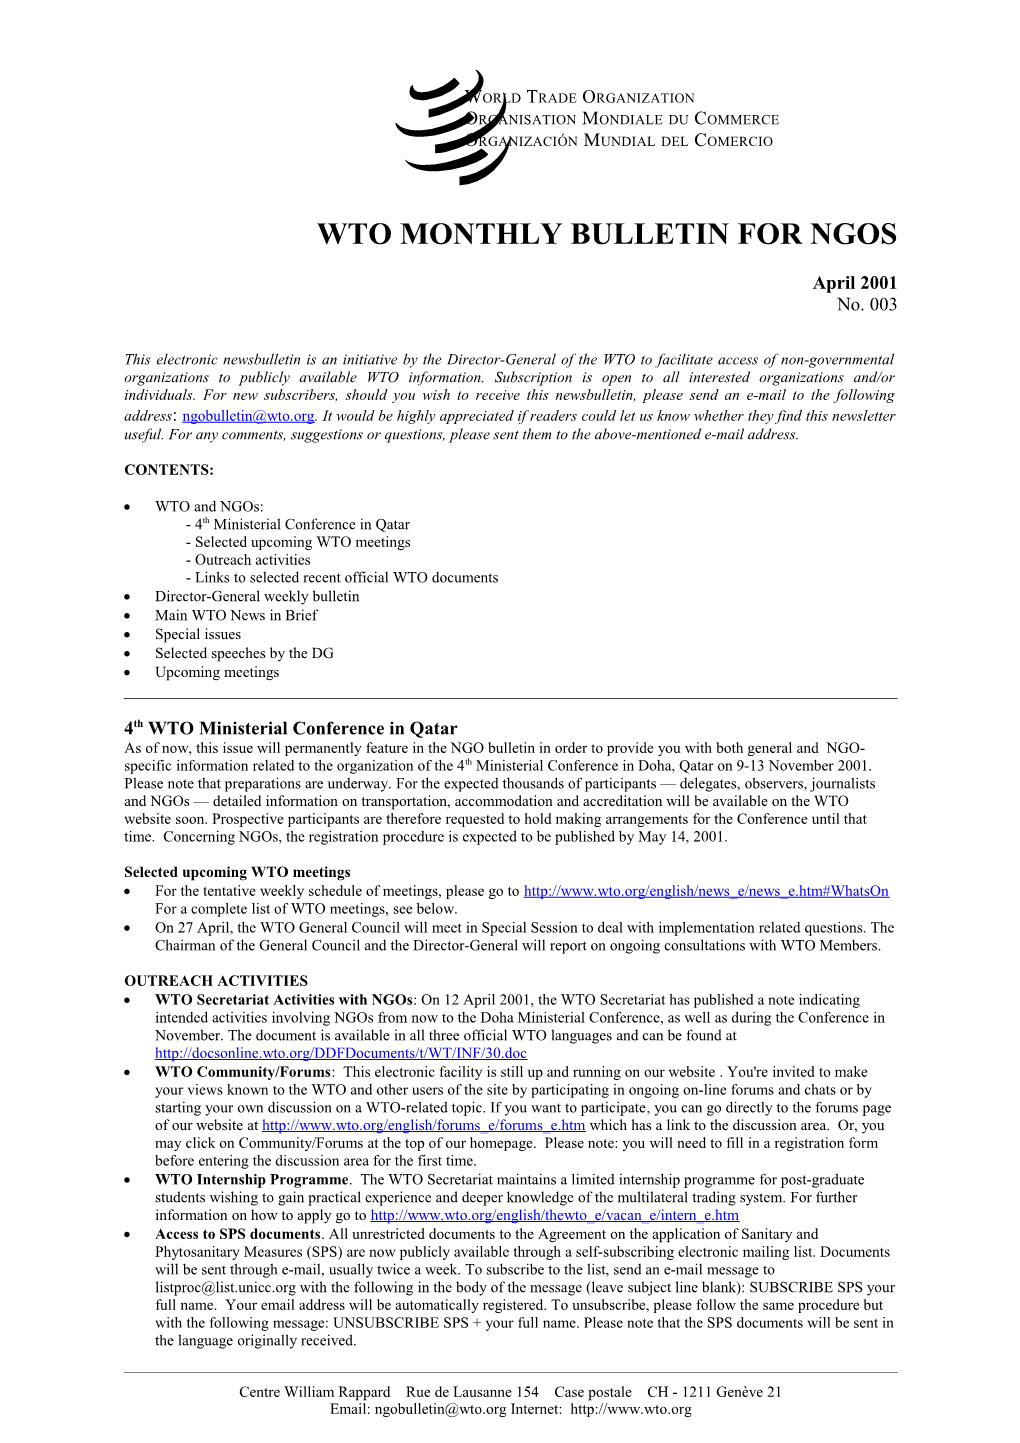 WTO MONTHLY Bulletin for Ngos